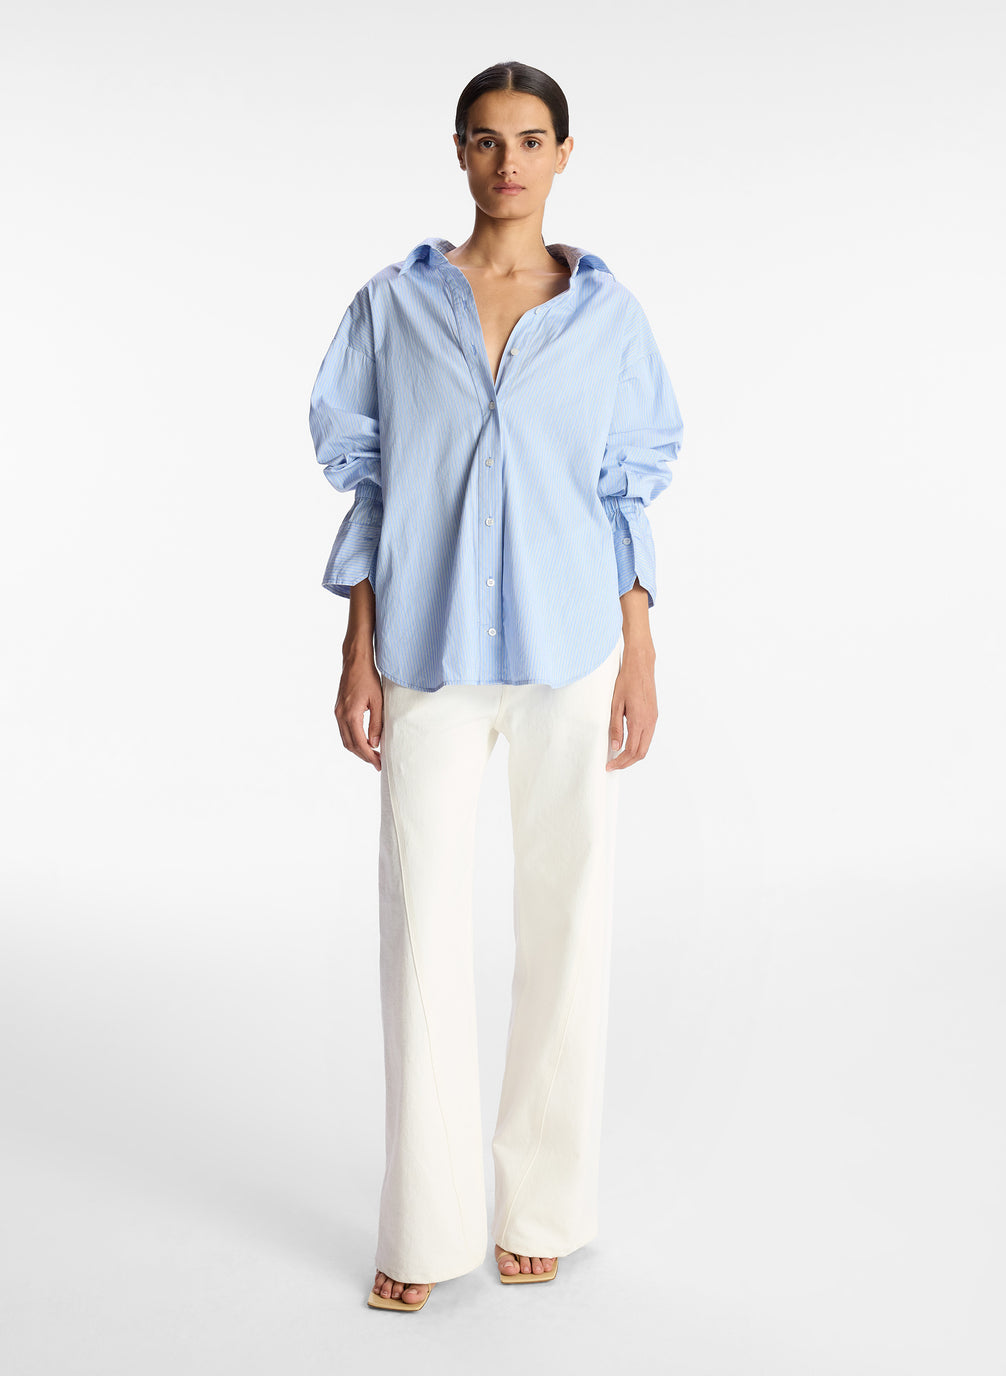 front view of woman wearing light blue striped oversized button down shirt and white pants